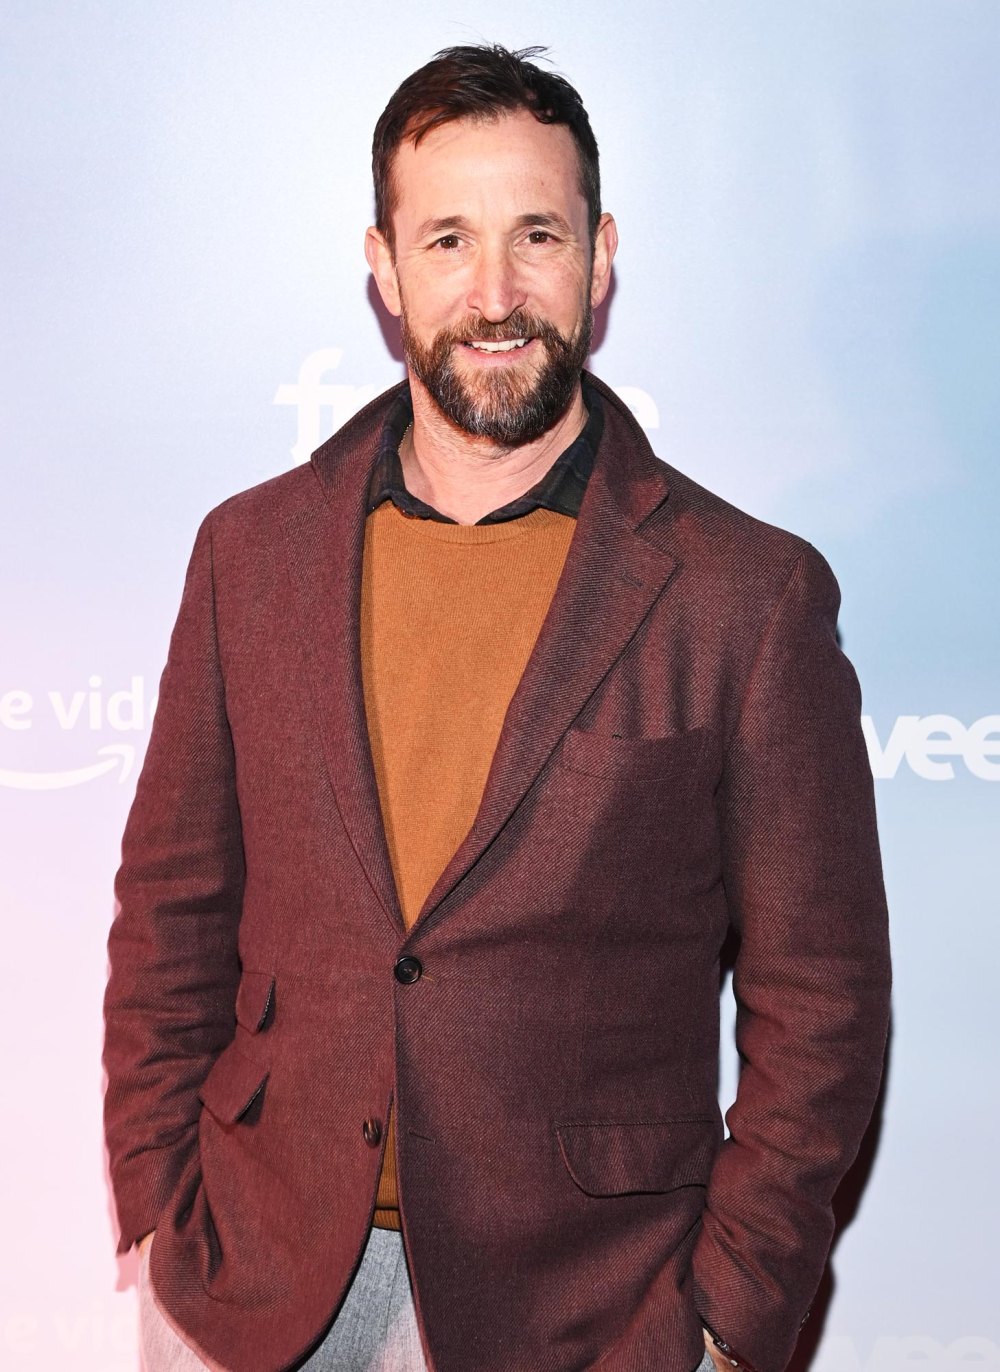 Noah Wyle Says His Nurse Mom Used to Critique His Performance on ER Every Week